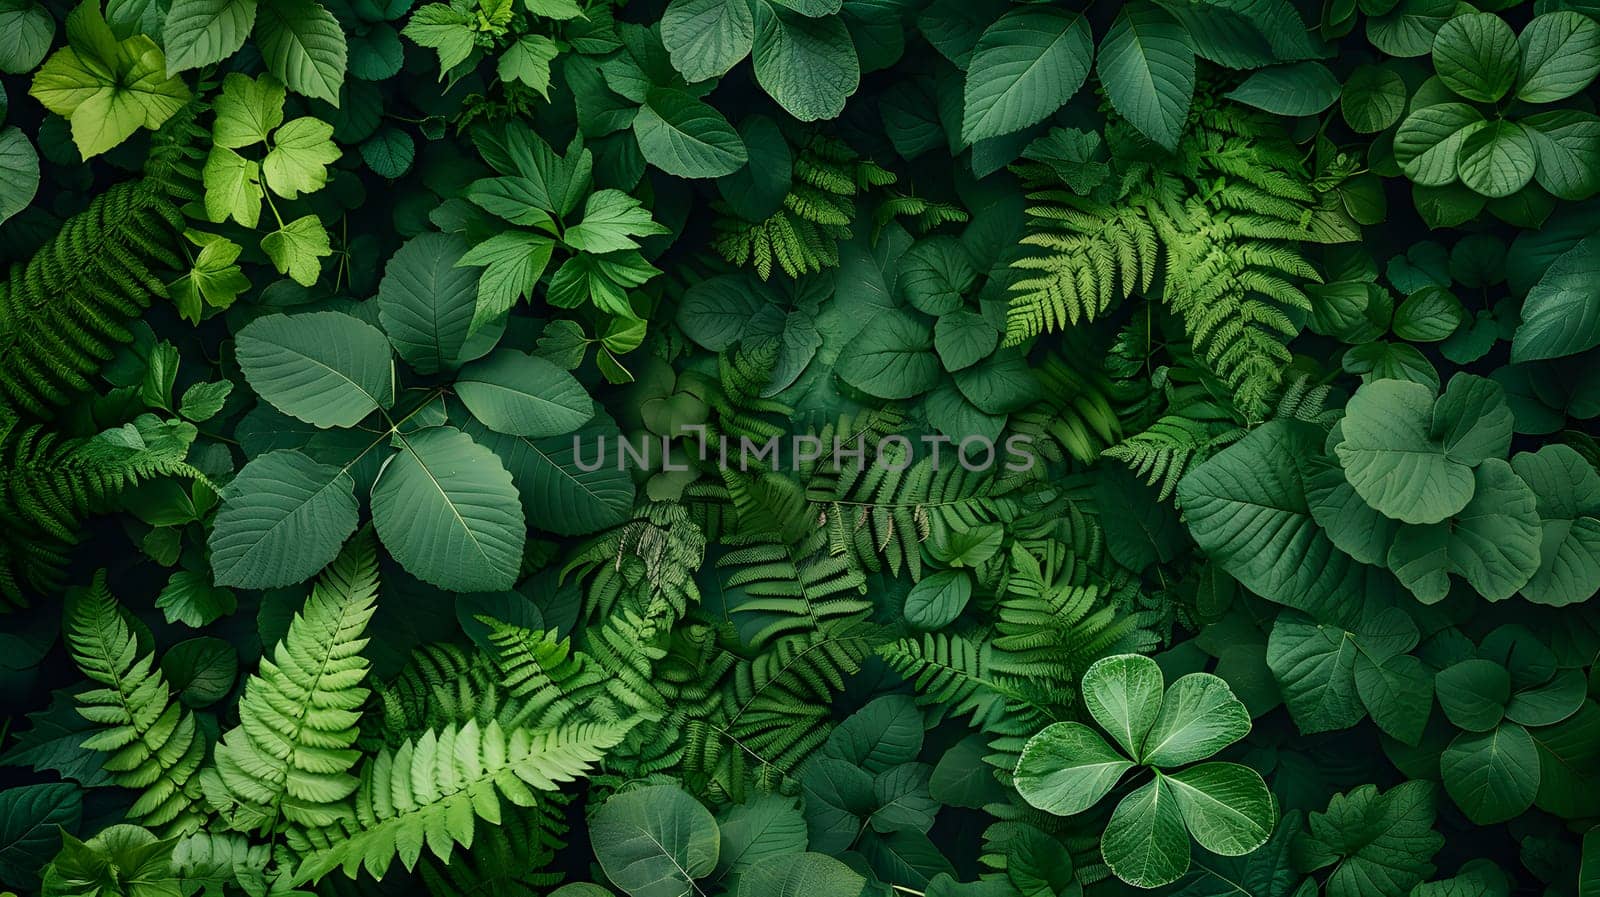 A closeup view of lush green leaves of a terrestrial plant growing on a wall, adding a touch of natural beauty to the landscape